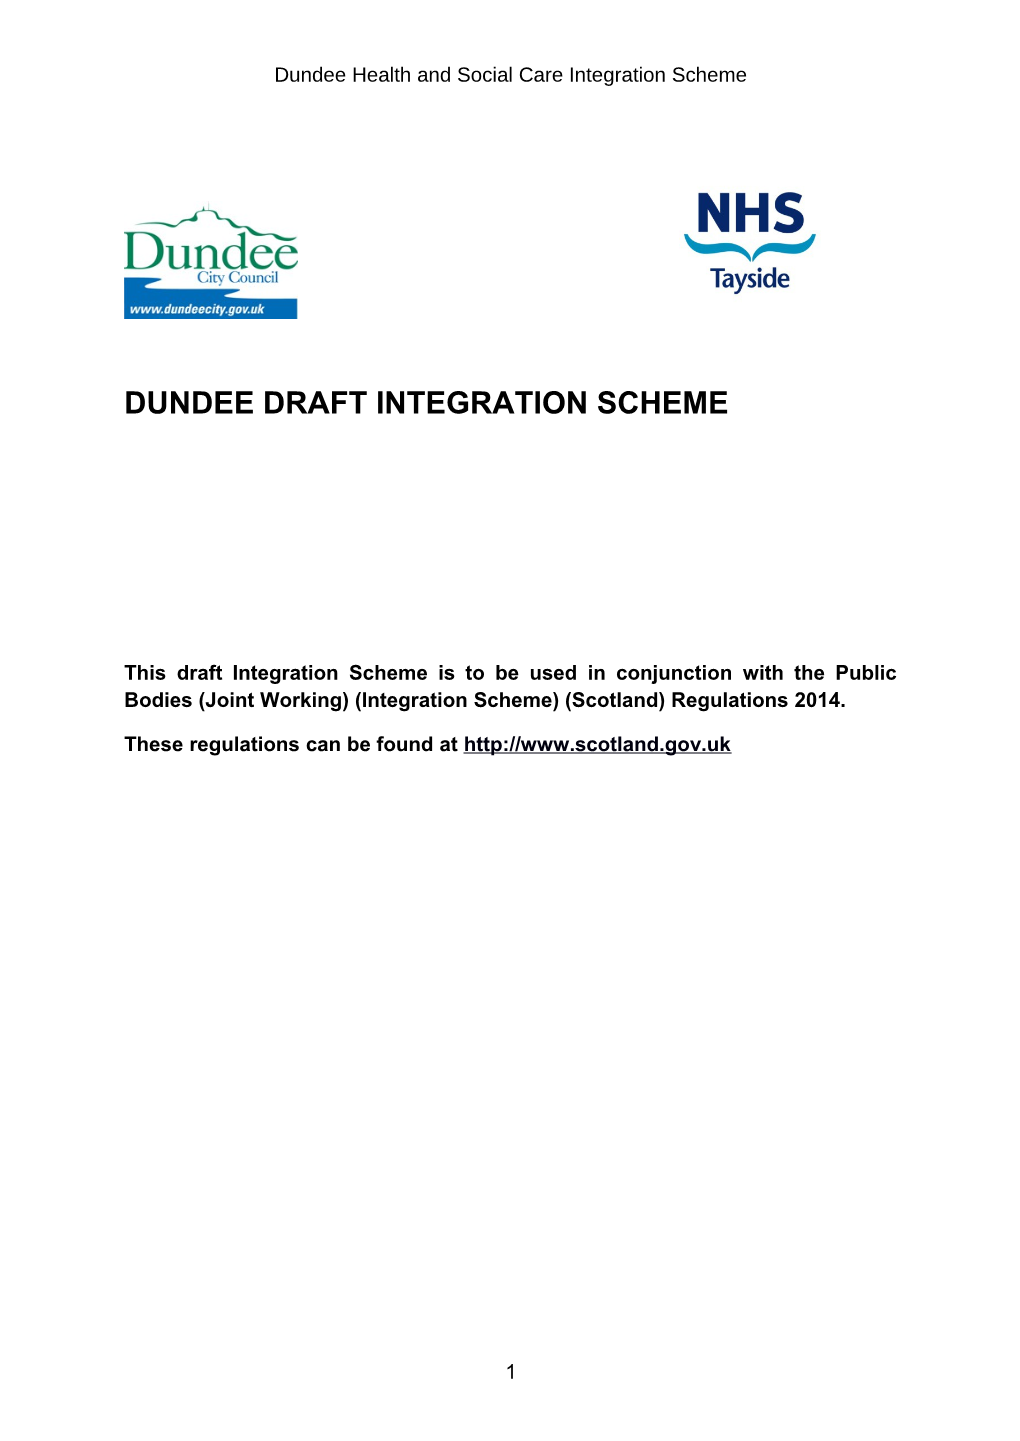 Dundee Health and Social Care Integration Scheme